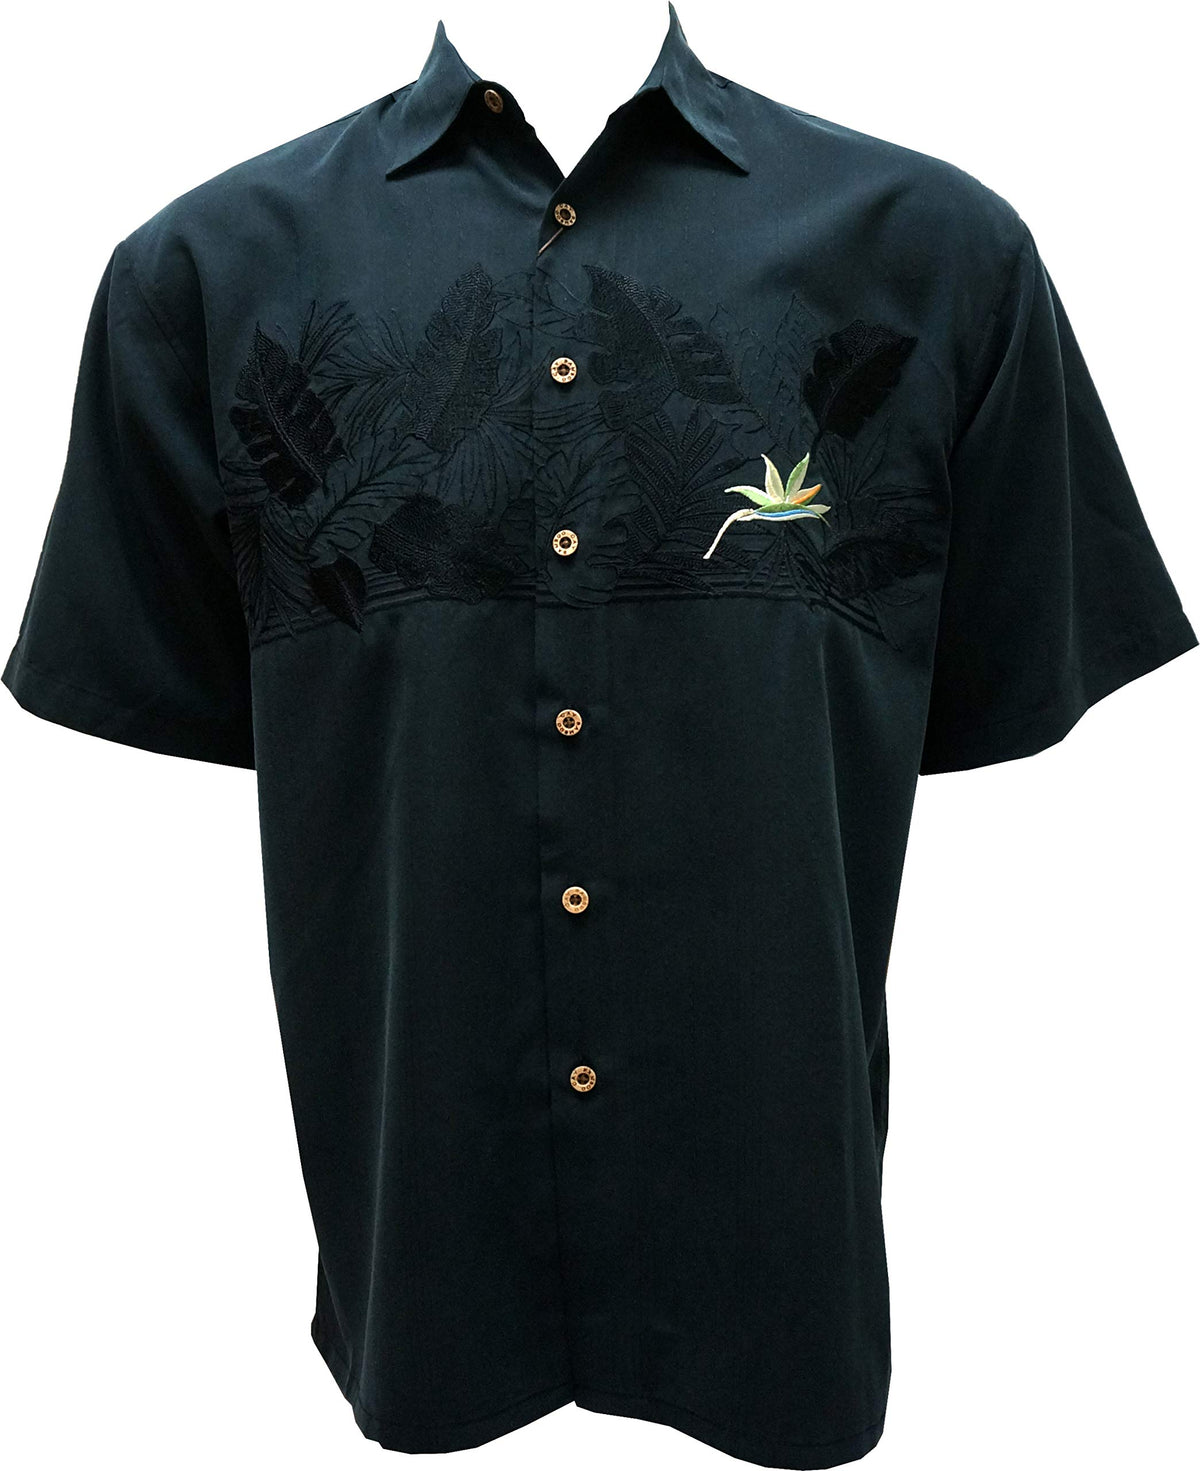 Bamboo Cay Men's Chest Bird of Paradise Tropical Style Embroidered